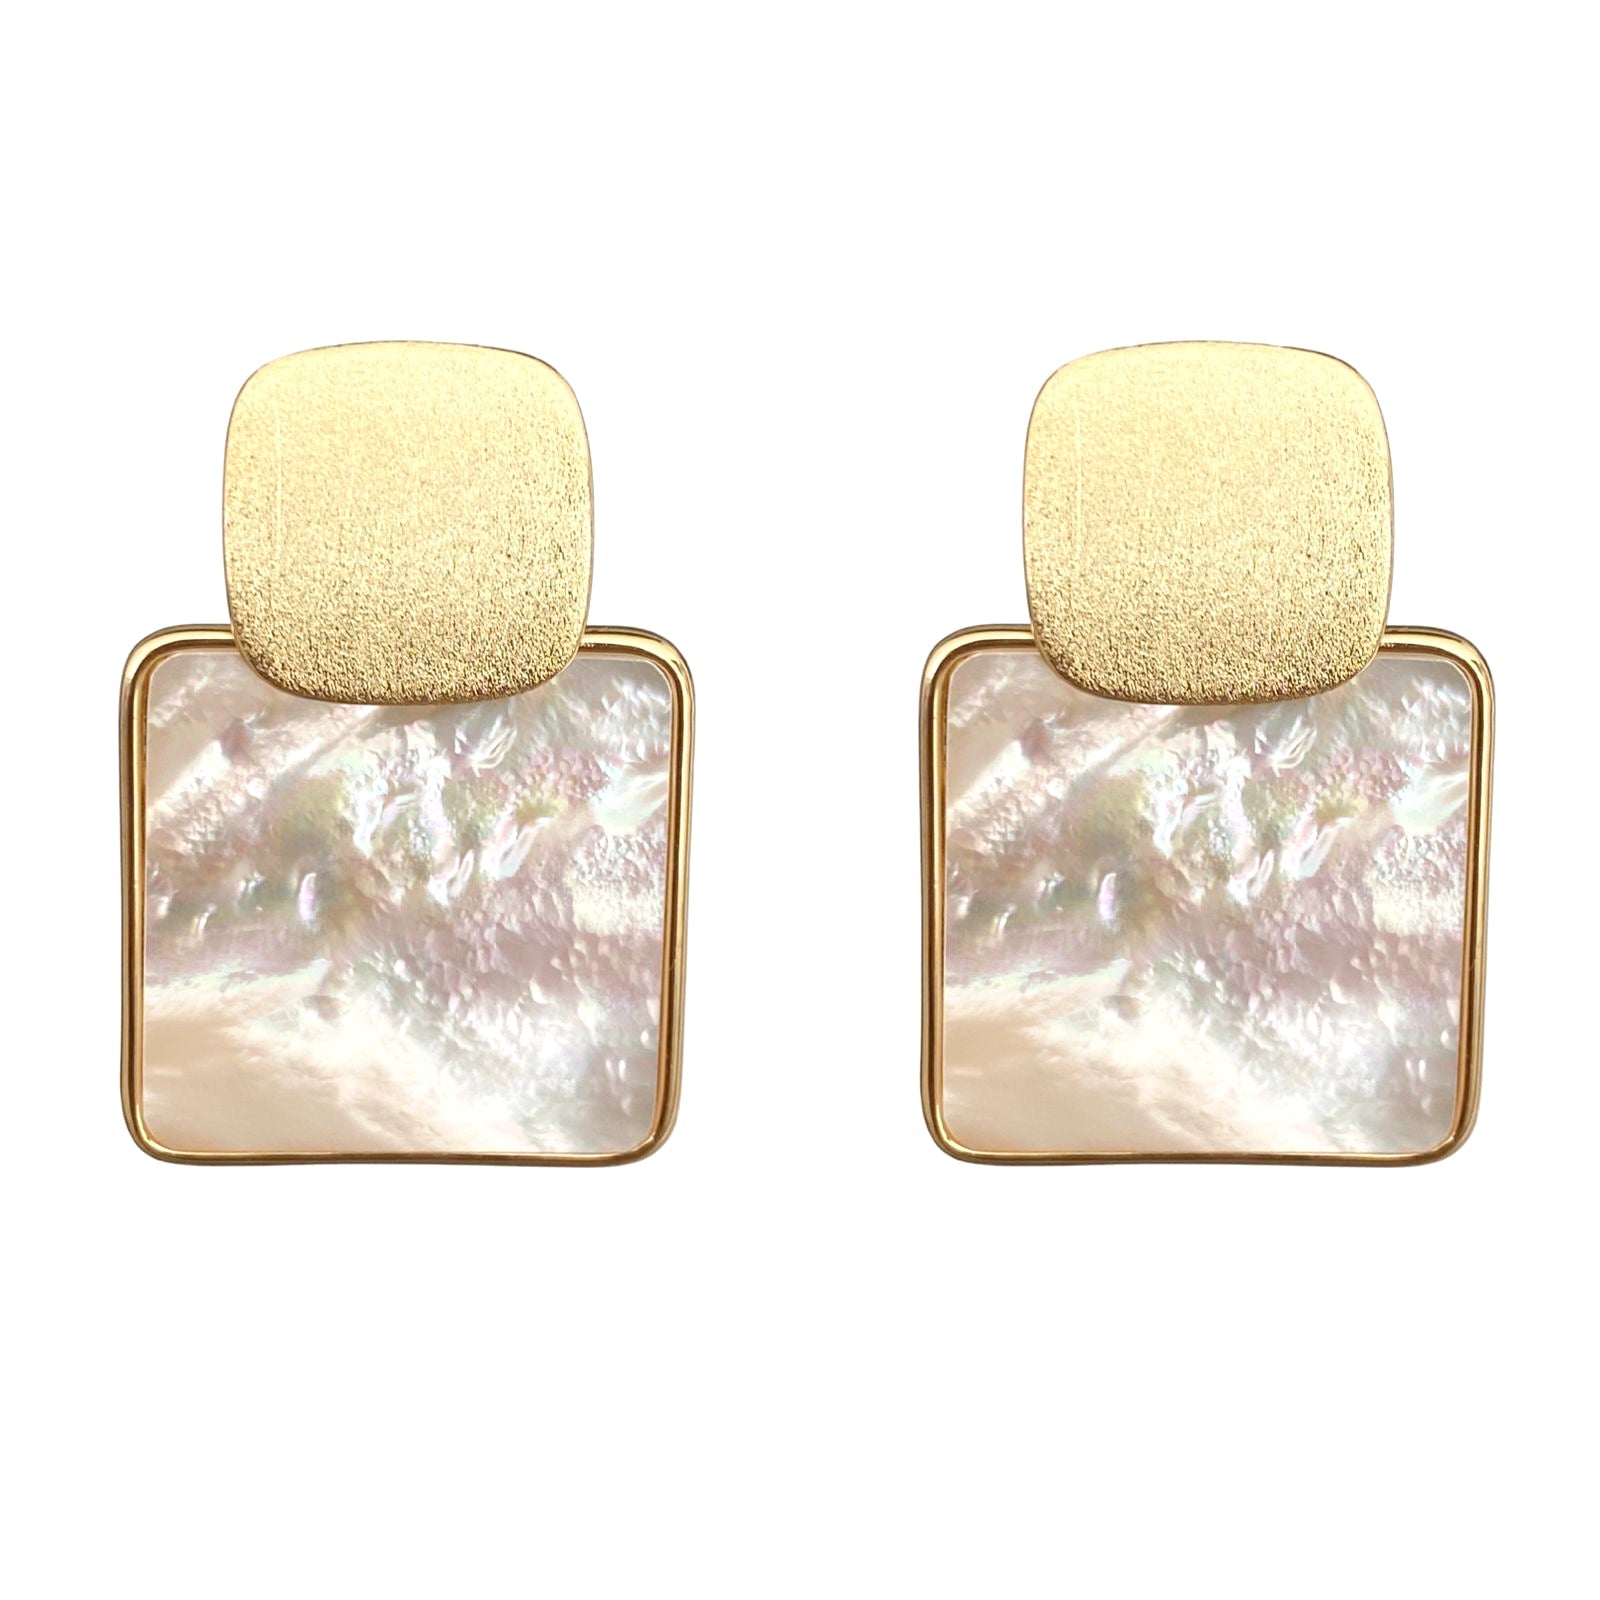 Square Earring, 18k, Gold Plated, Stainless Steel - Ibiza Passion